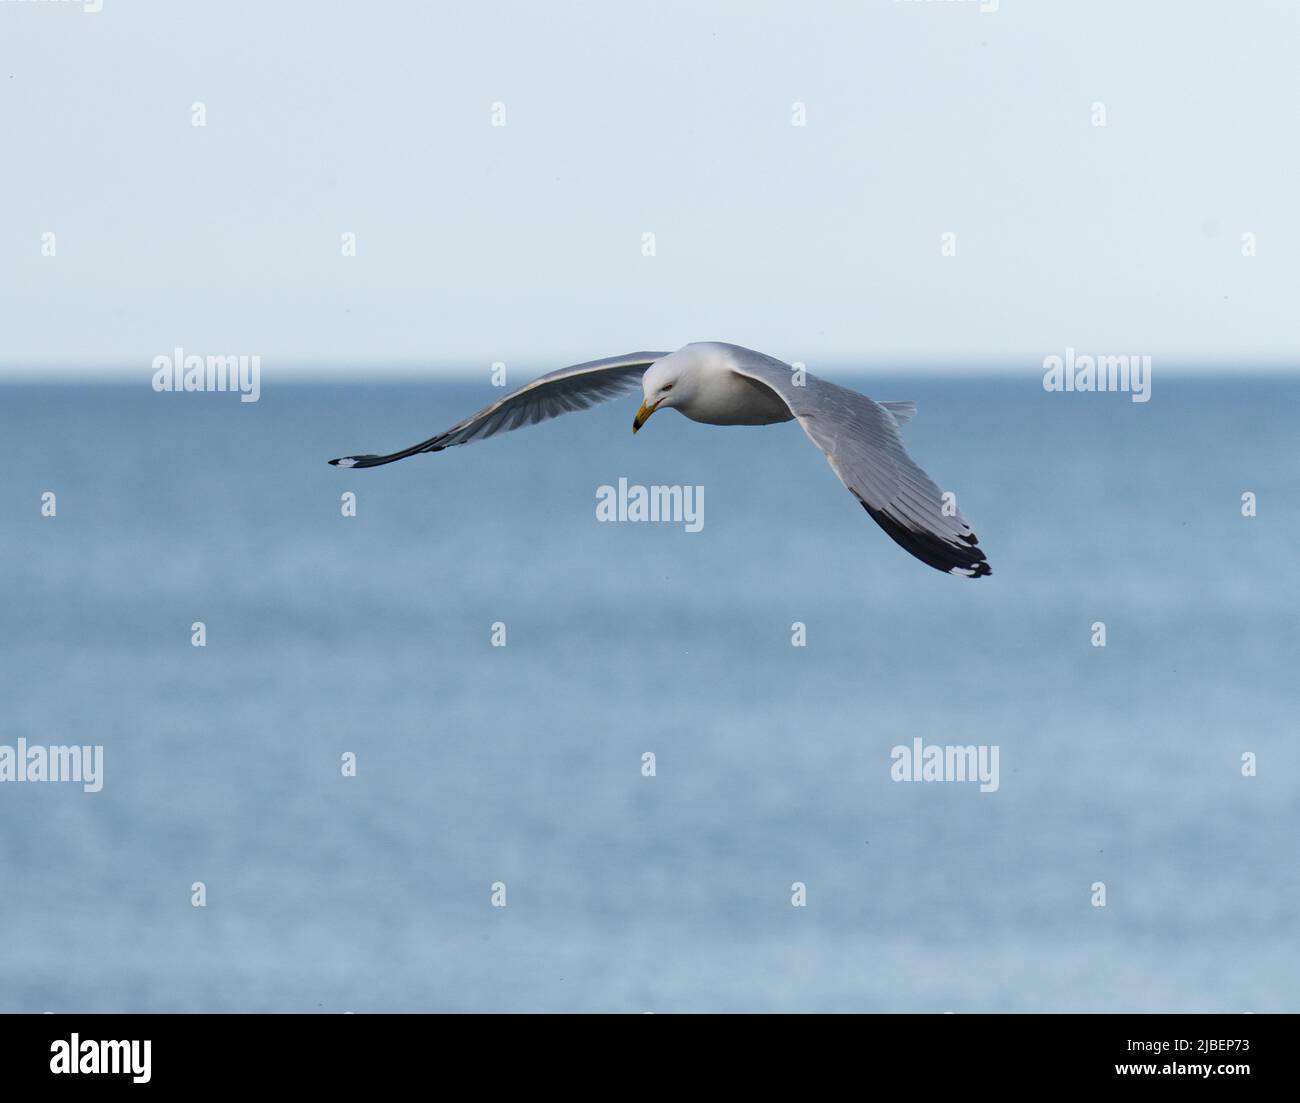 one isolated seagull water bird or water fowl in full flight with wings spread over water of Lake Ontario in Canada horizontal format room for type Stock Photo